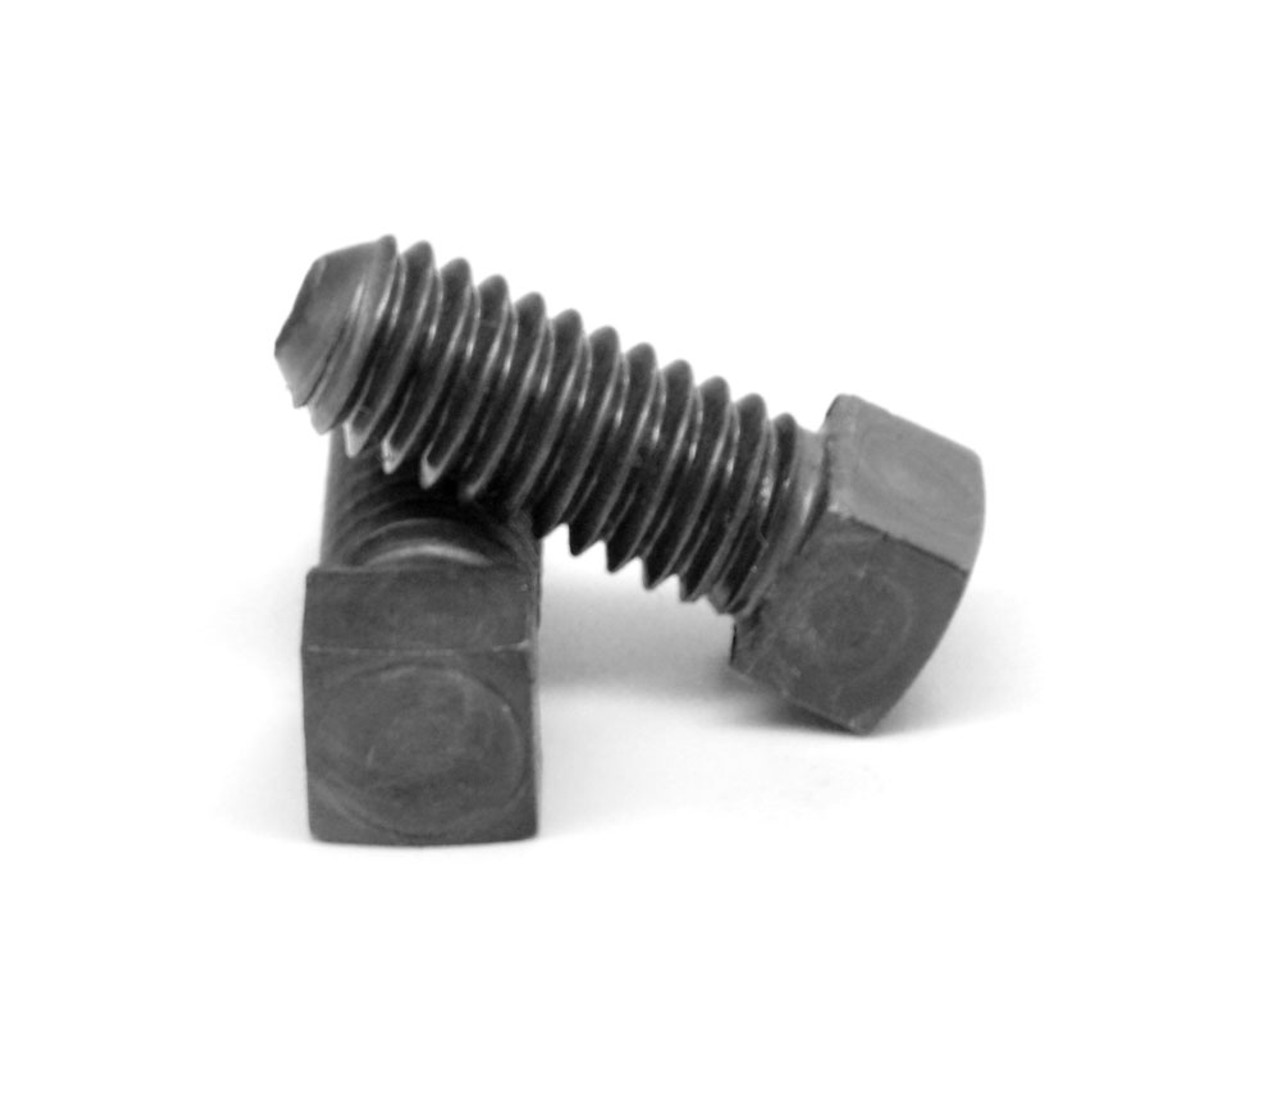 3/8"-16 x 1" (FT) Coarse Thread Square Head Set Screw Cone Point Low Carbon Steel Case Hardened Plain Finish